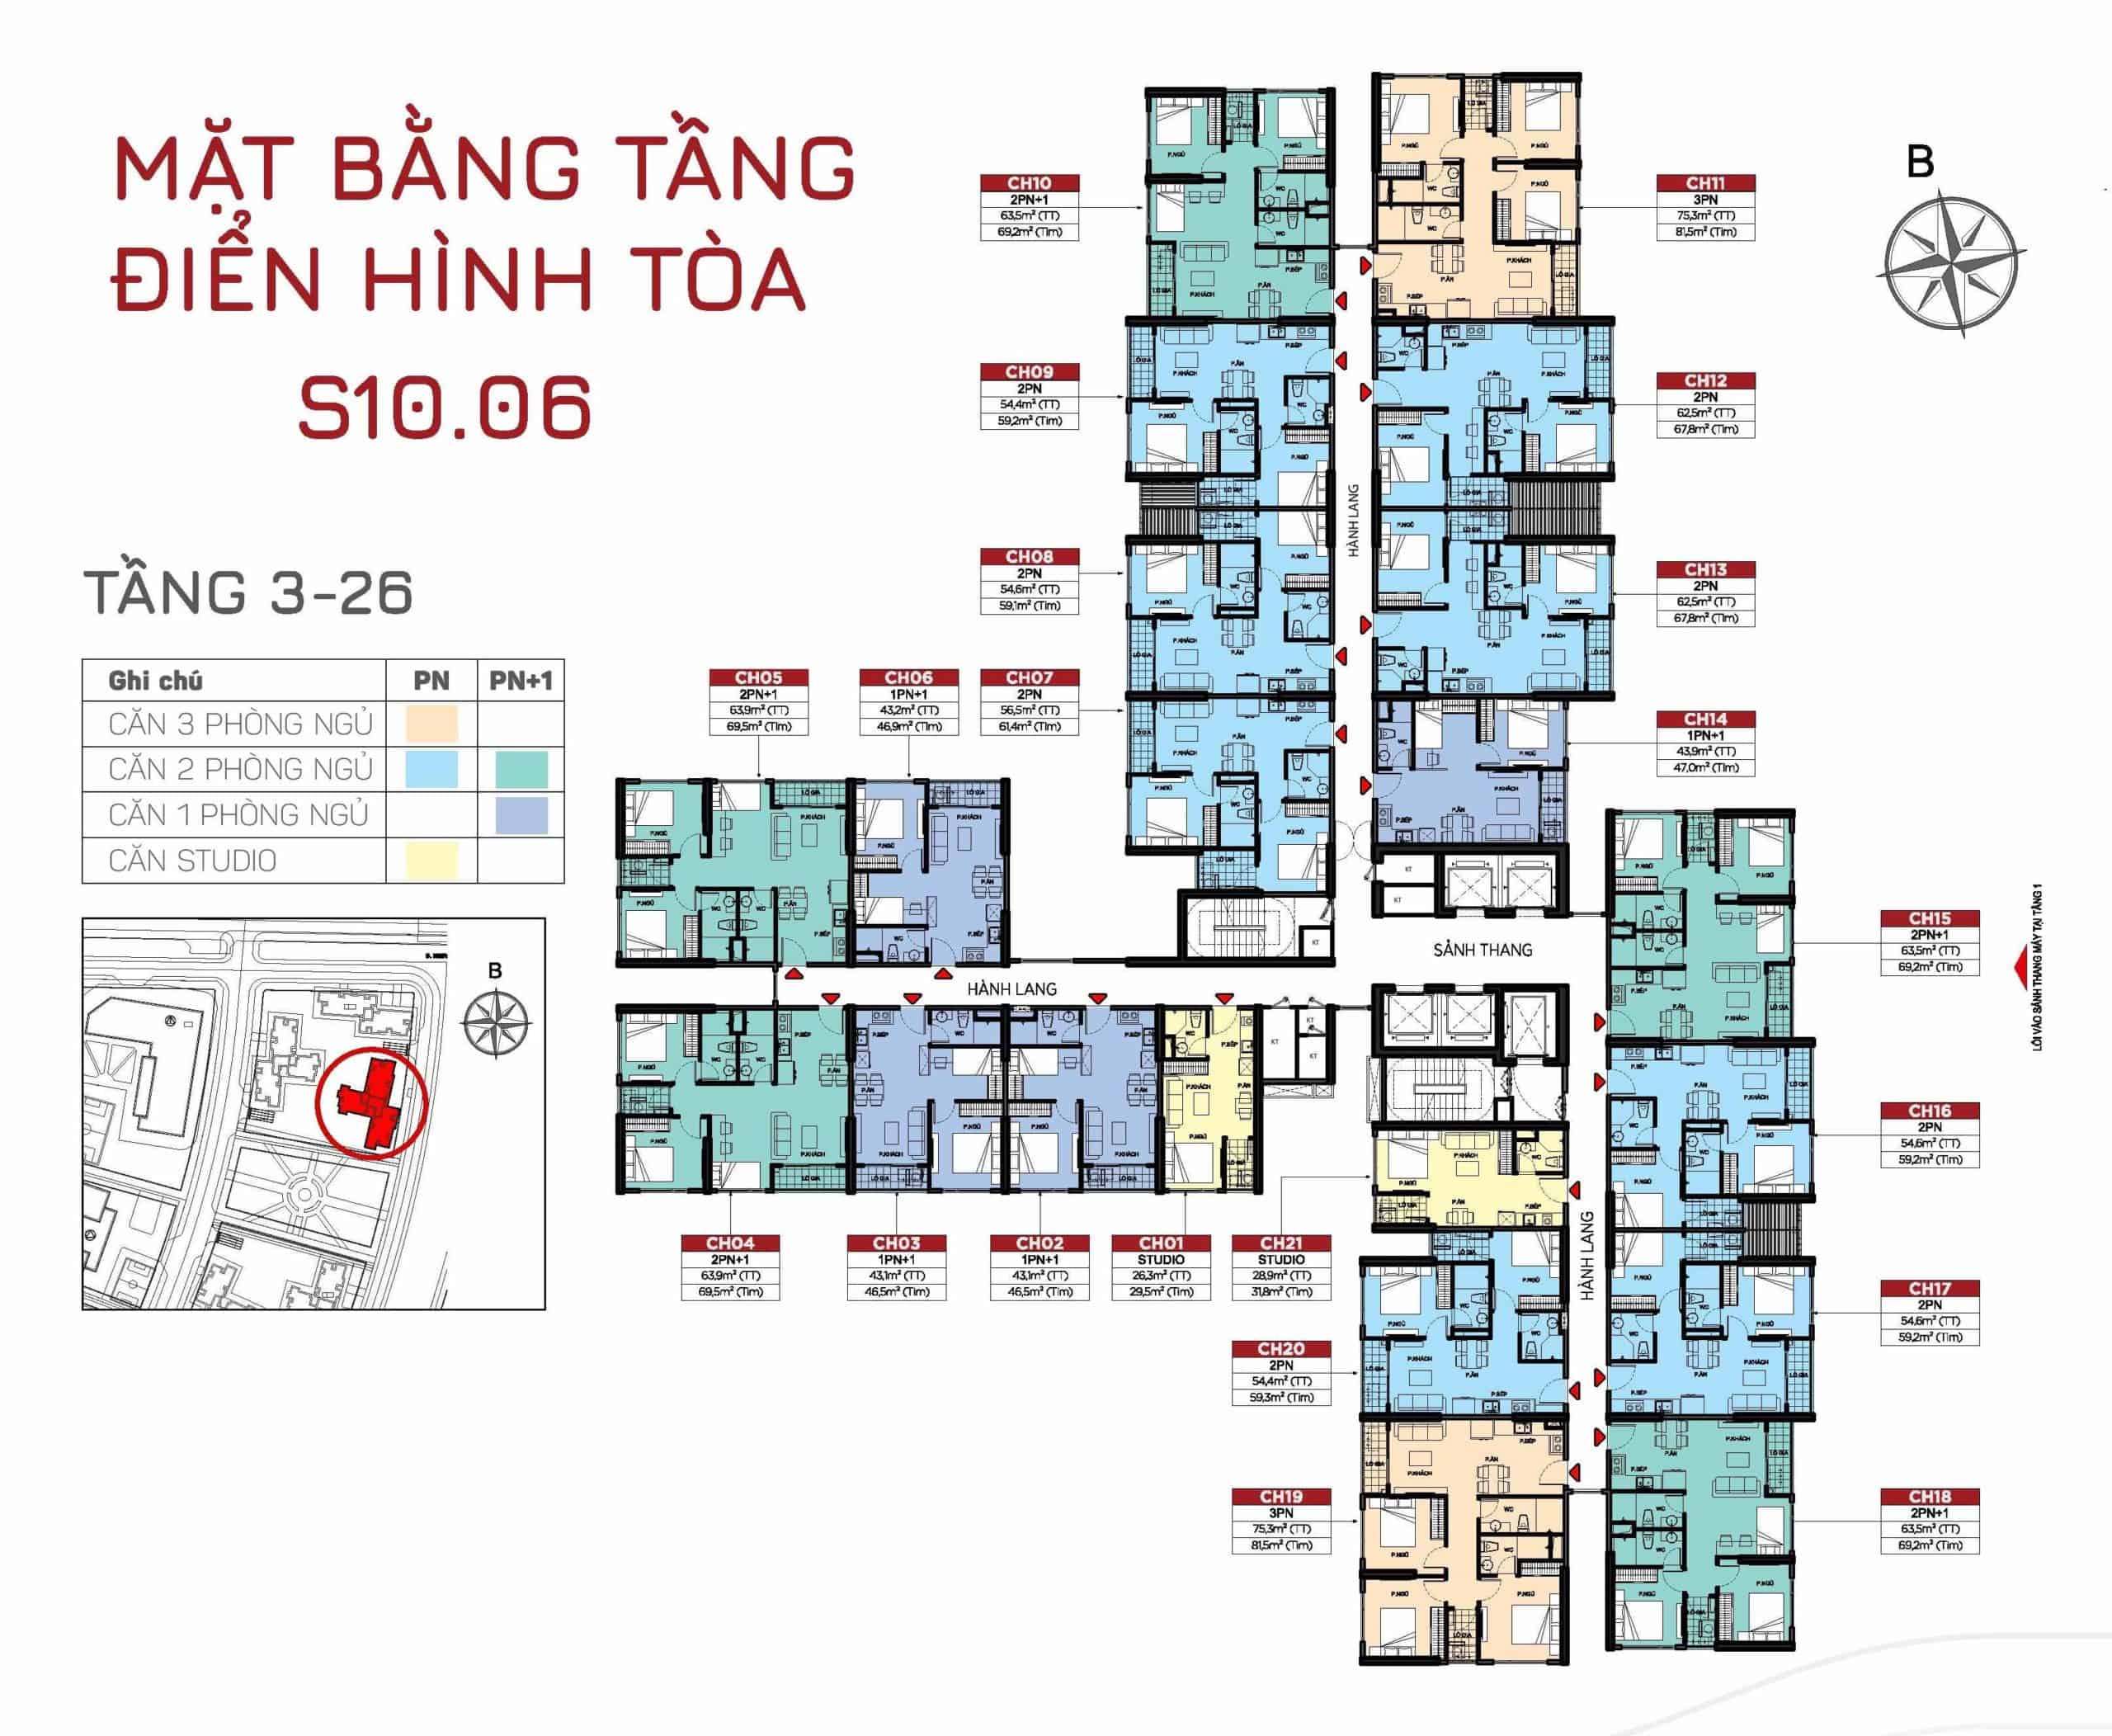 layout tòa s1006 tầng 3-26